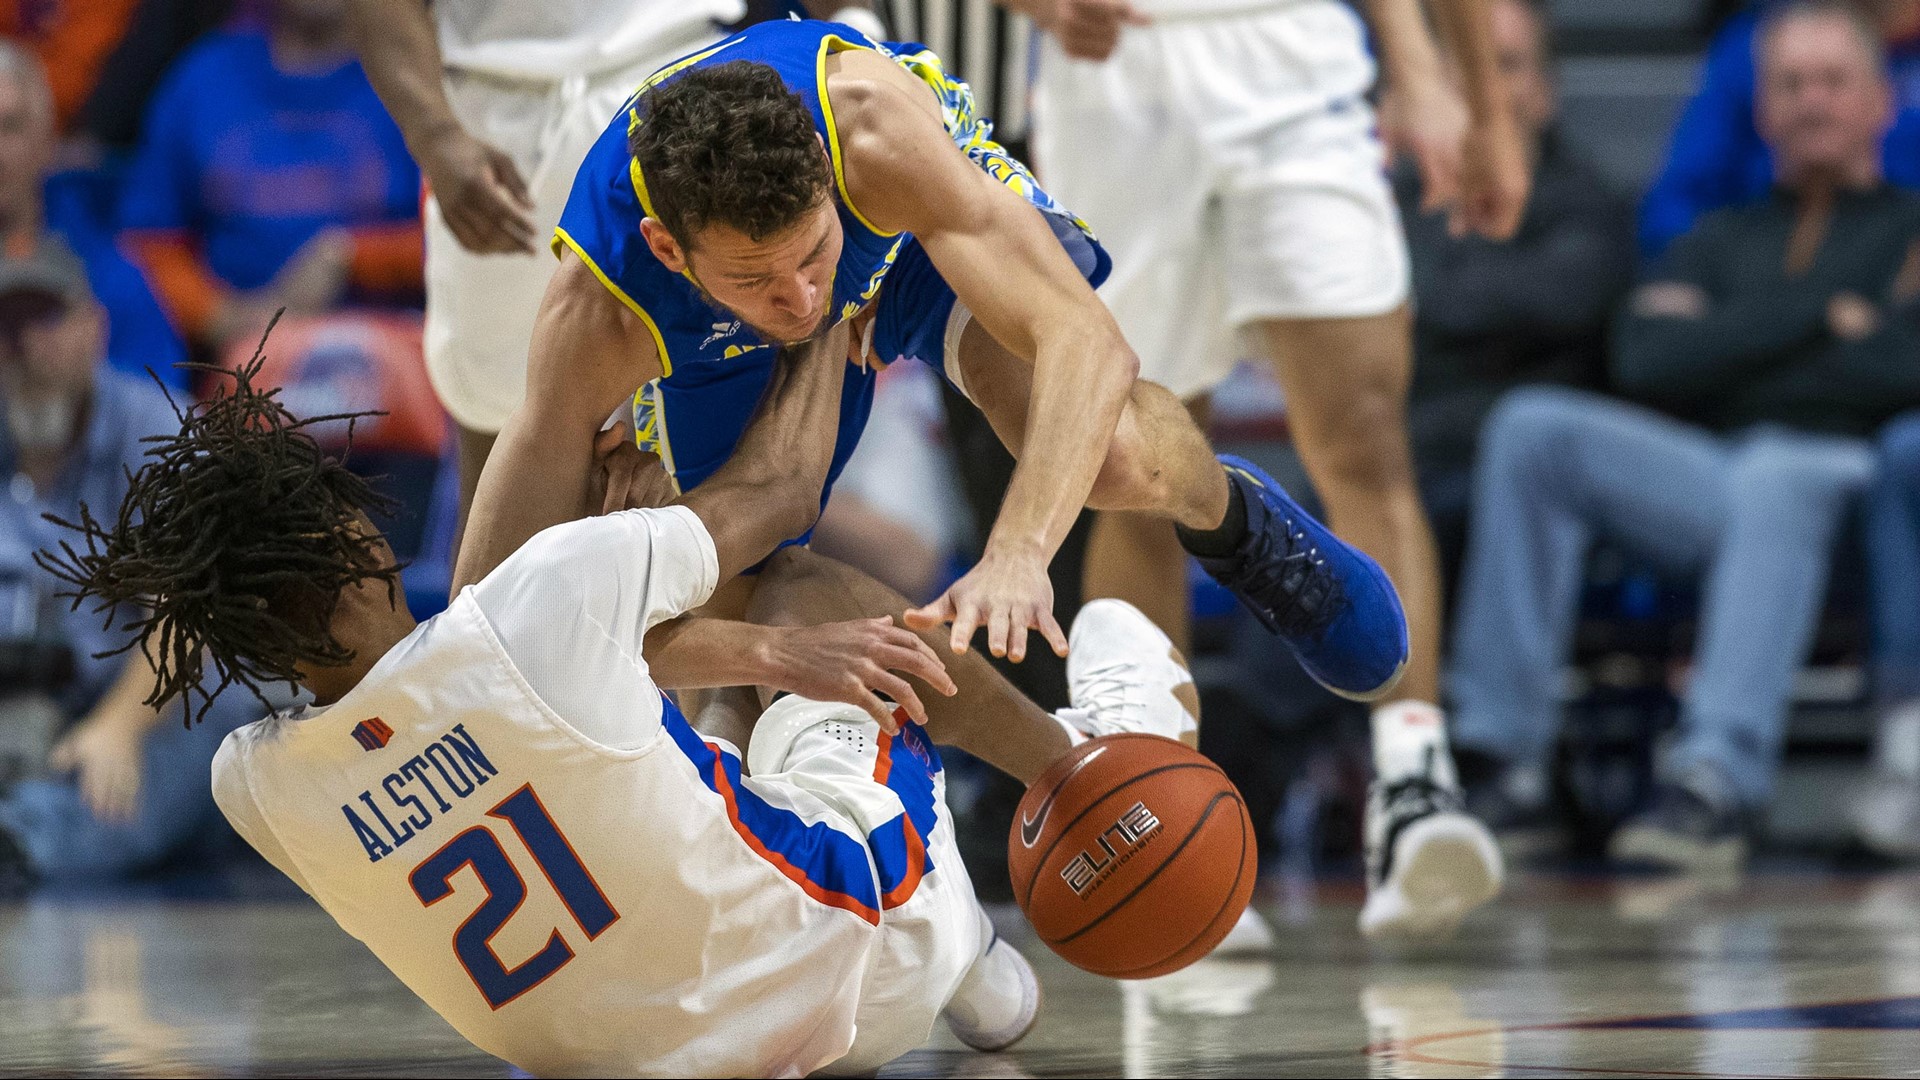 Boise State basketball Standings are deceiving for the Broncos